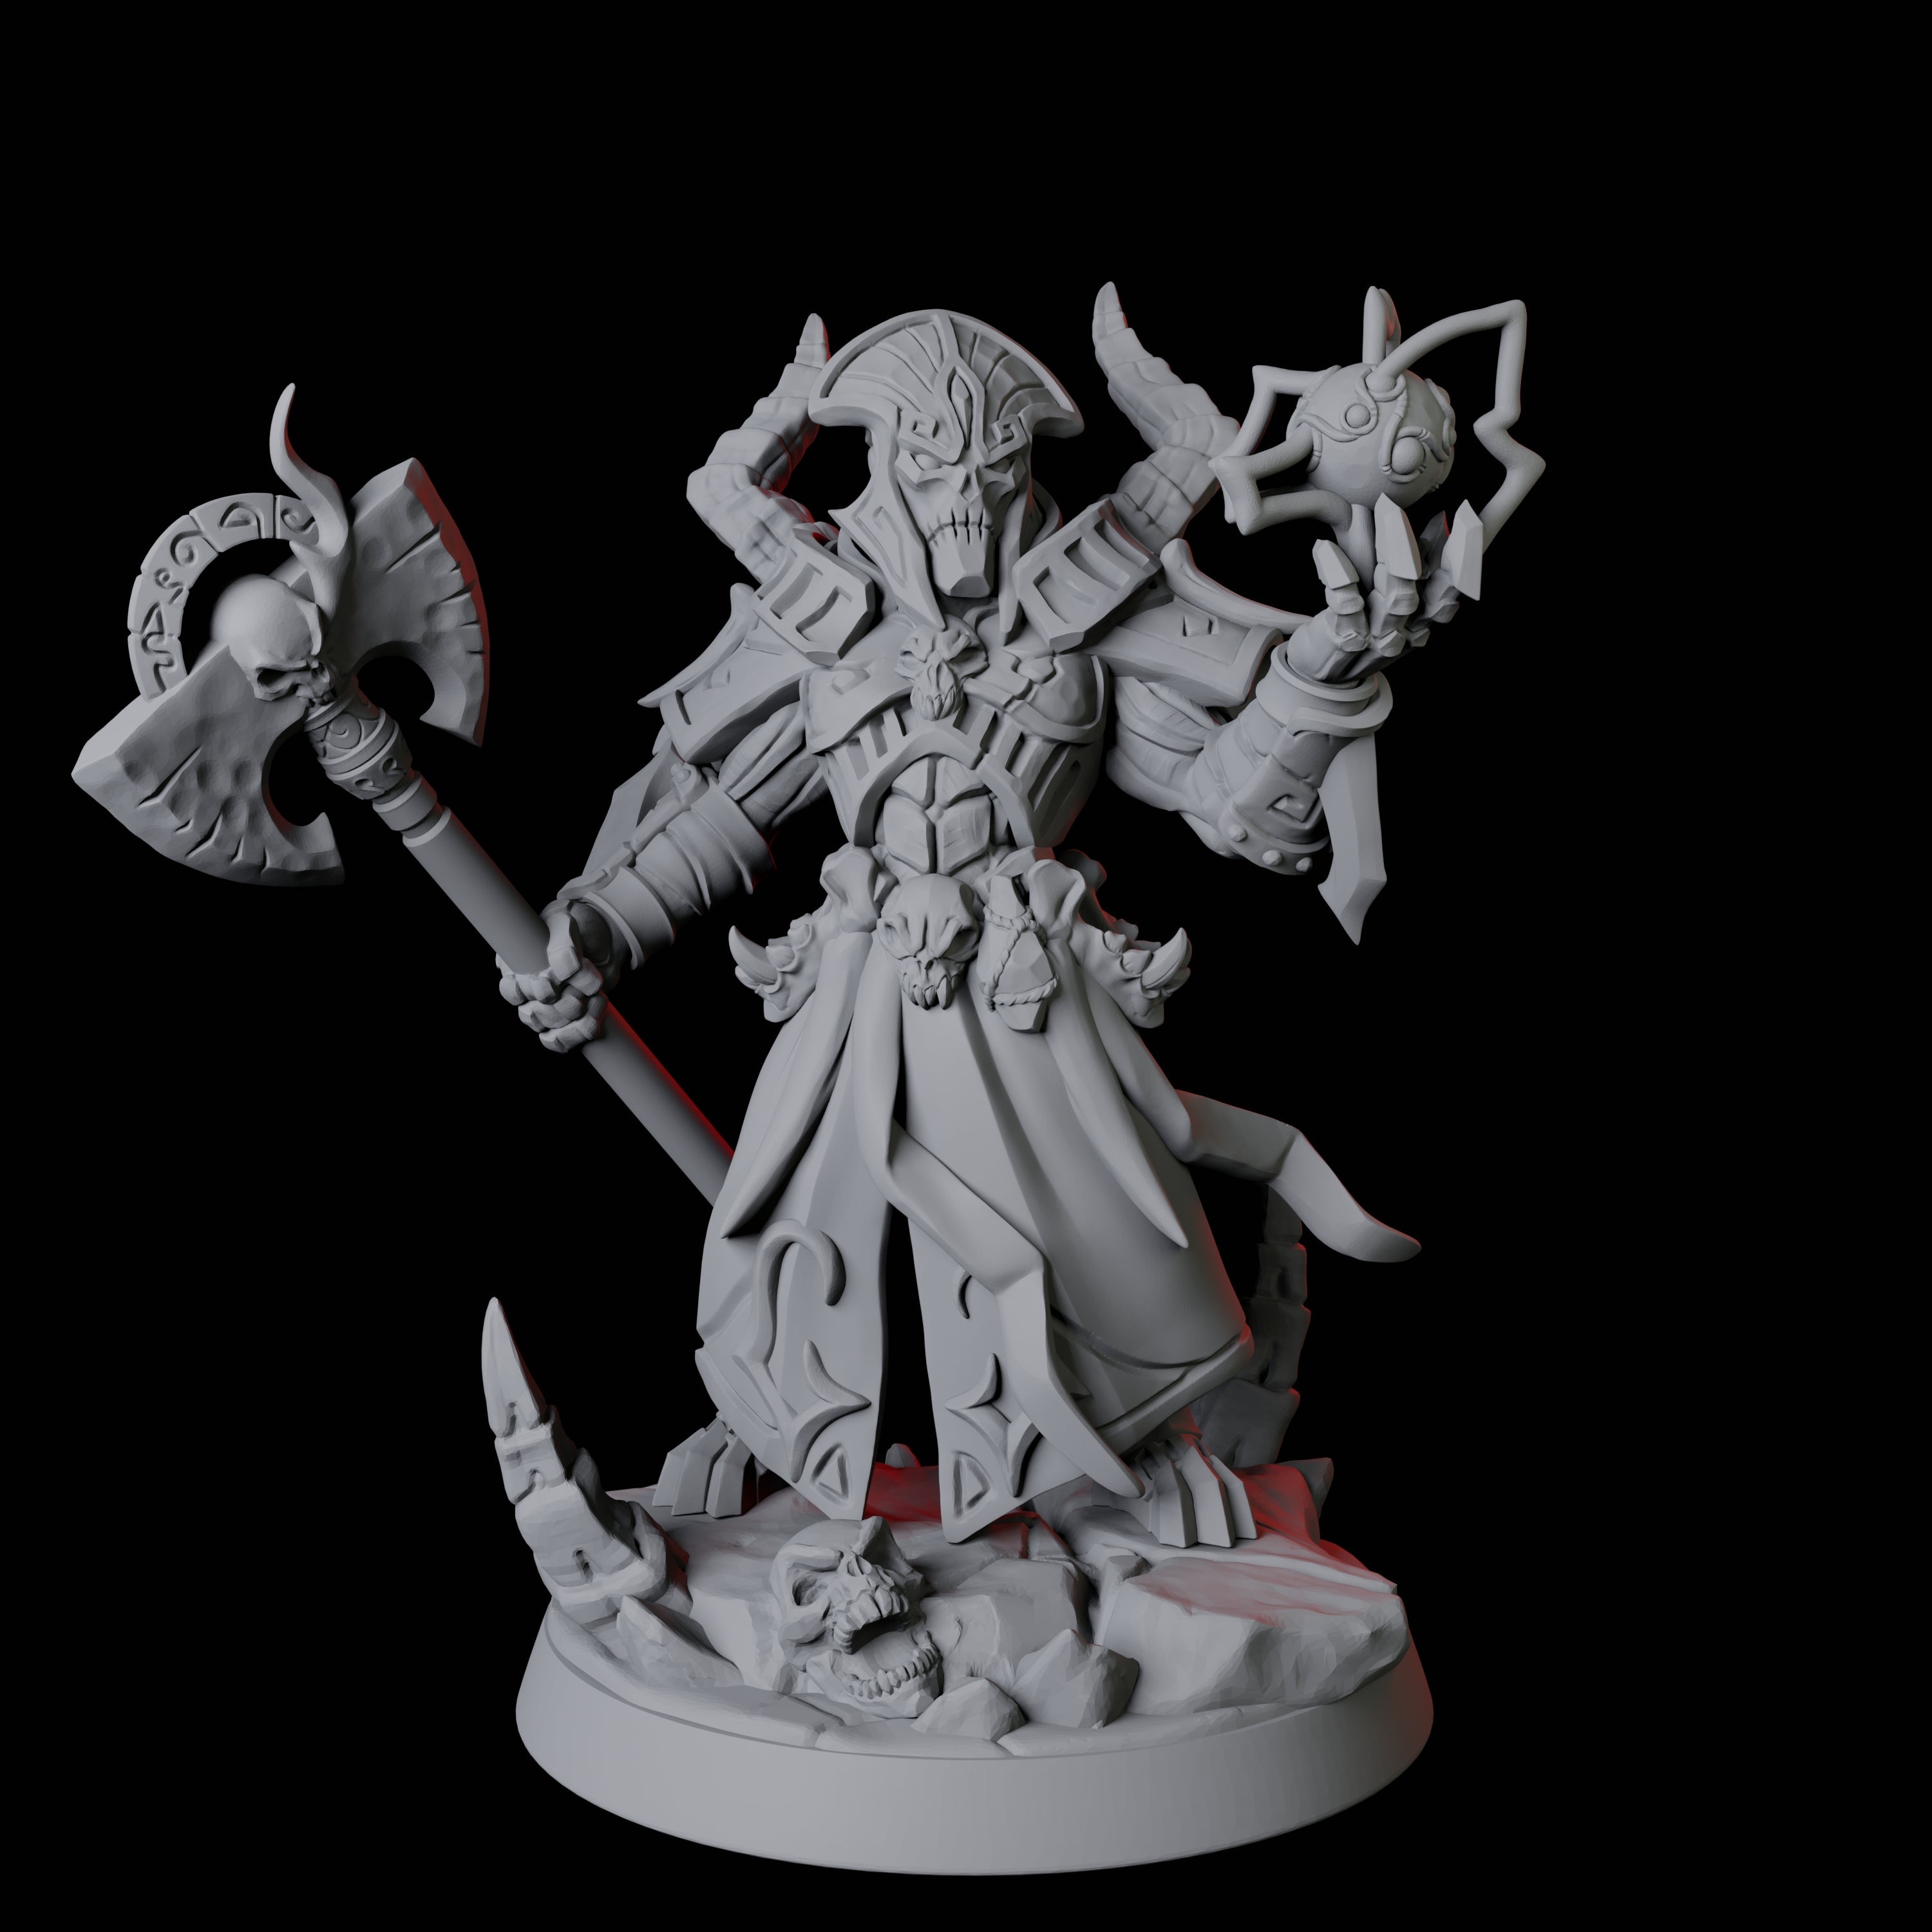 Powerful Warforged Warlock Miniature for Dungeons and Dragons, Pathfinder or other TTRPGs